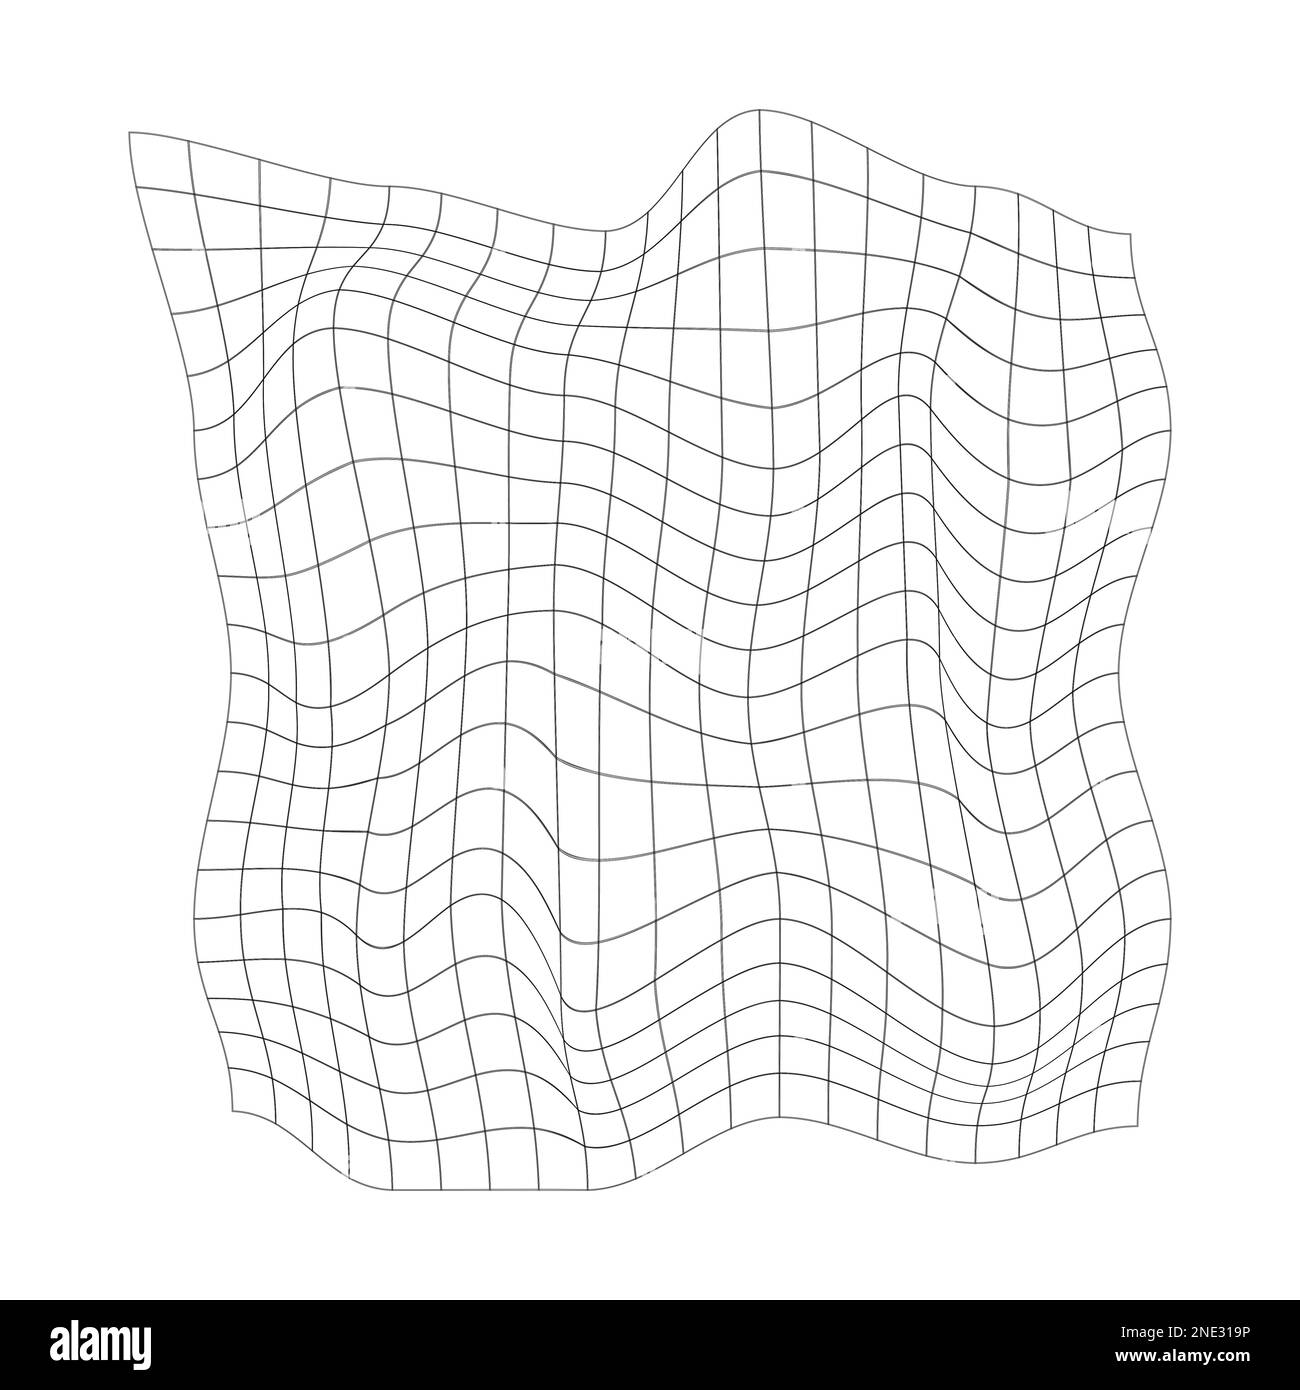 Distorted square grid. Mesh warp texture. Bented net isolated on white background. Curvatured lattice. Checkered pattern deformation Stock Vector